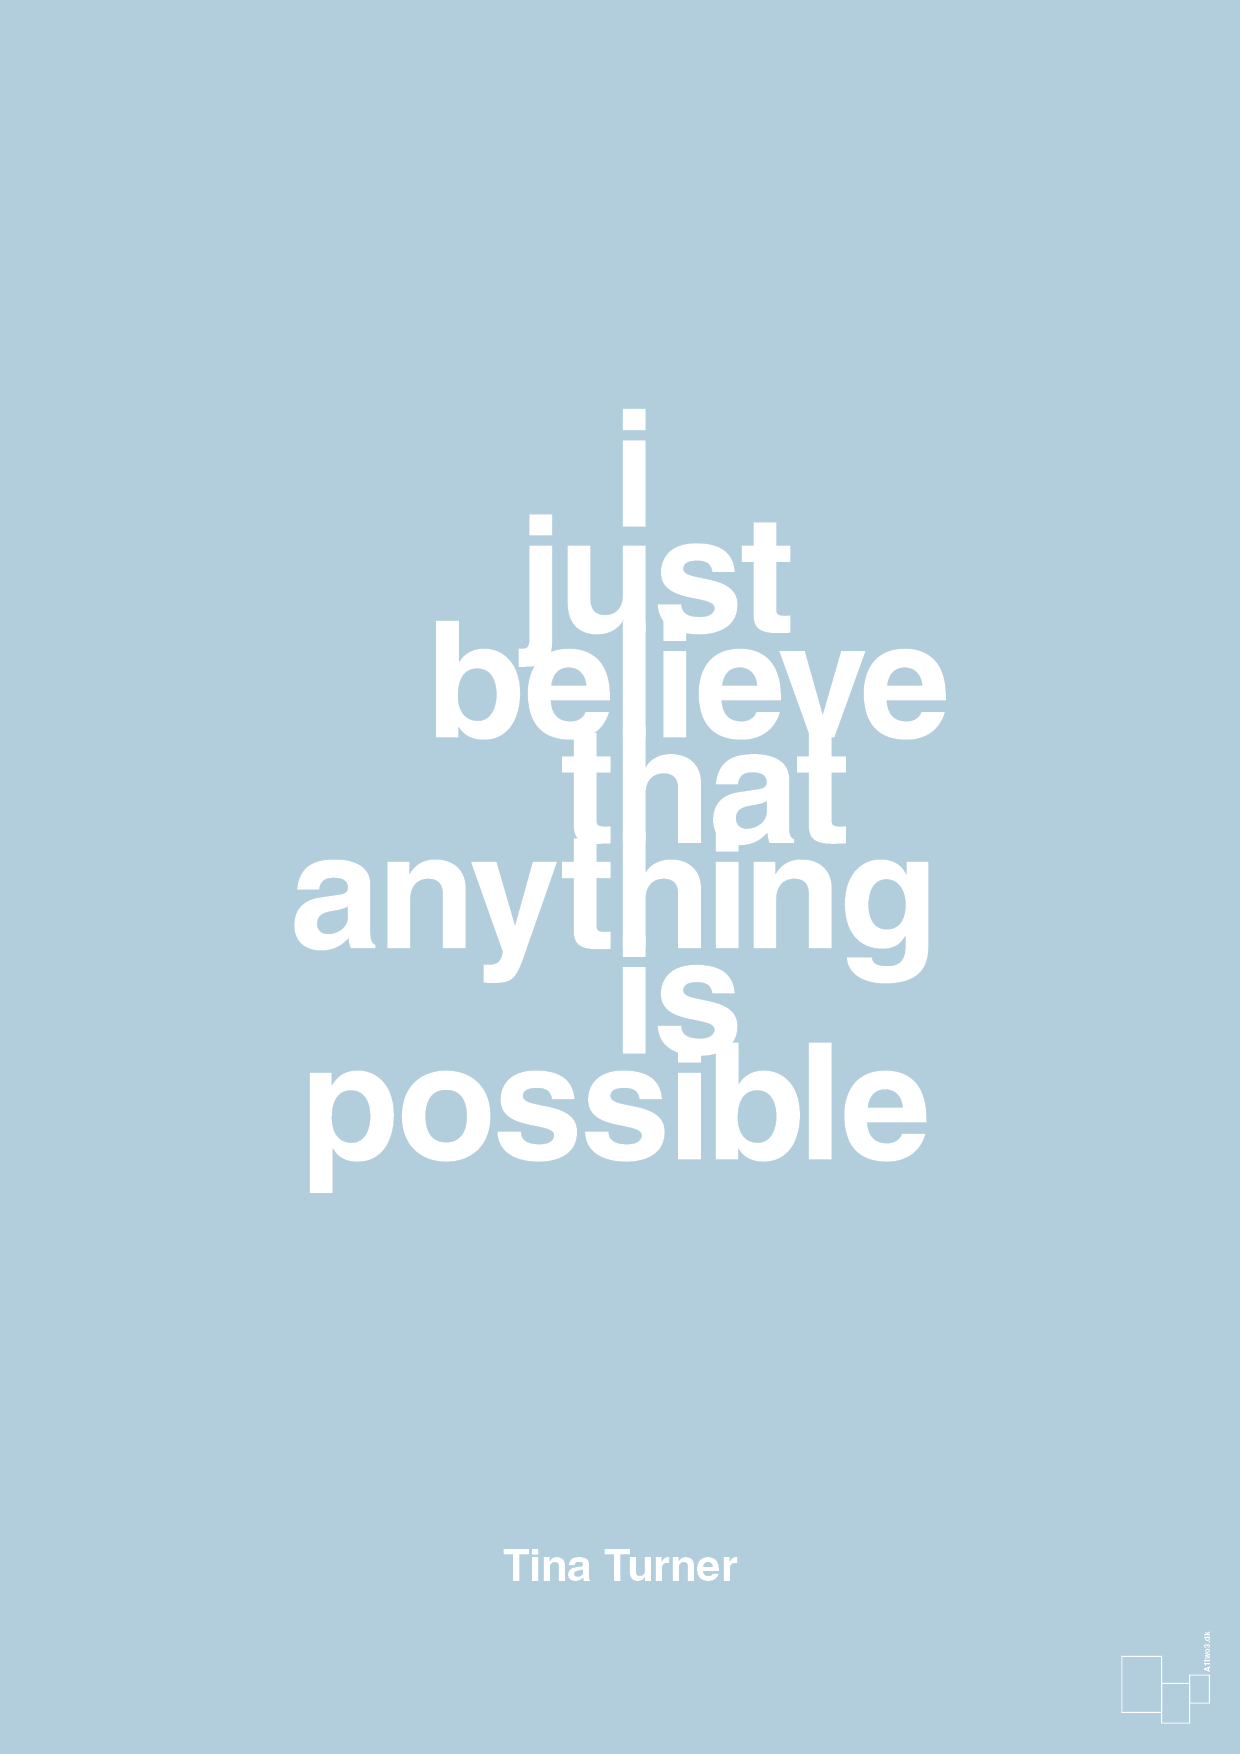 i just believe that anything is possible - Plakat med Citater i Heavenly Blue